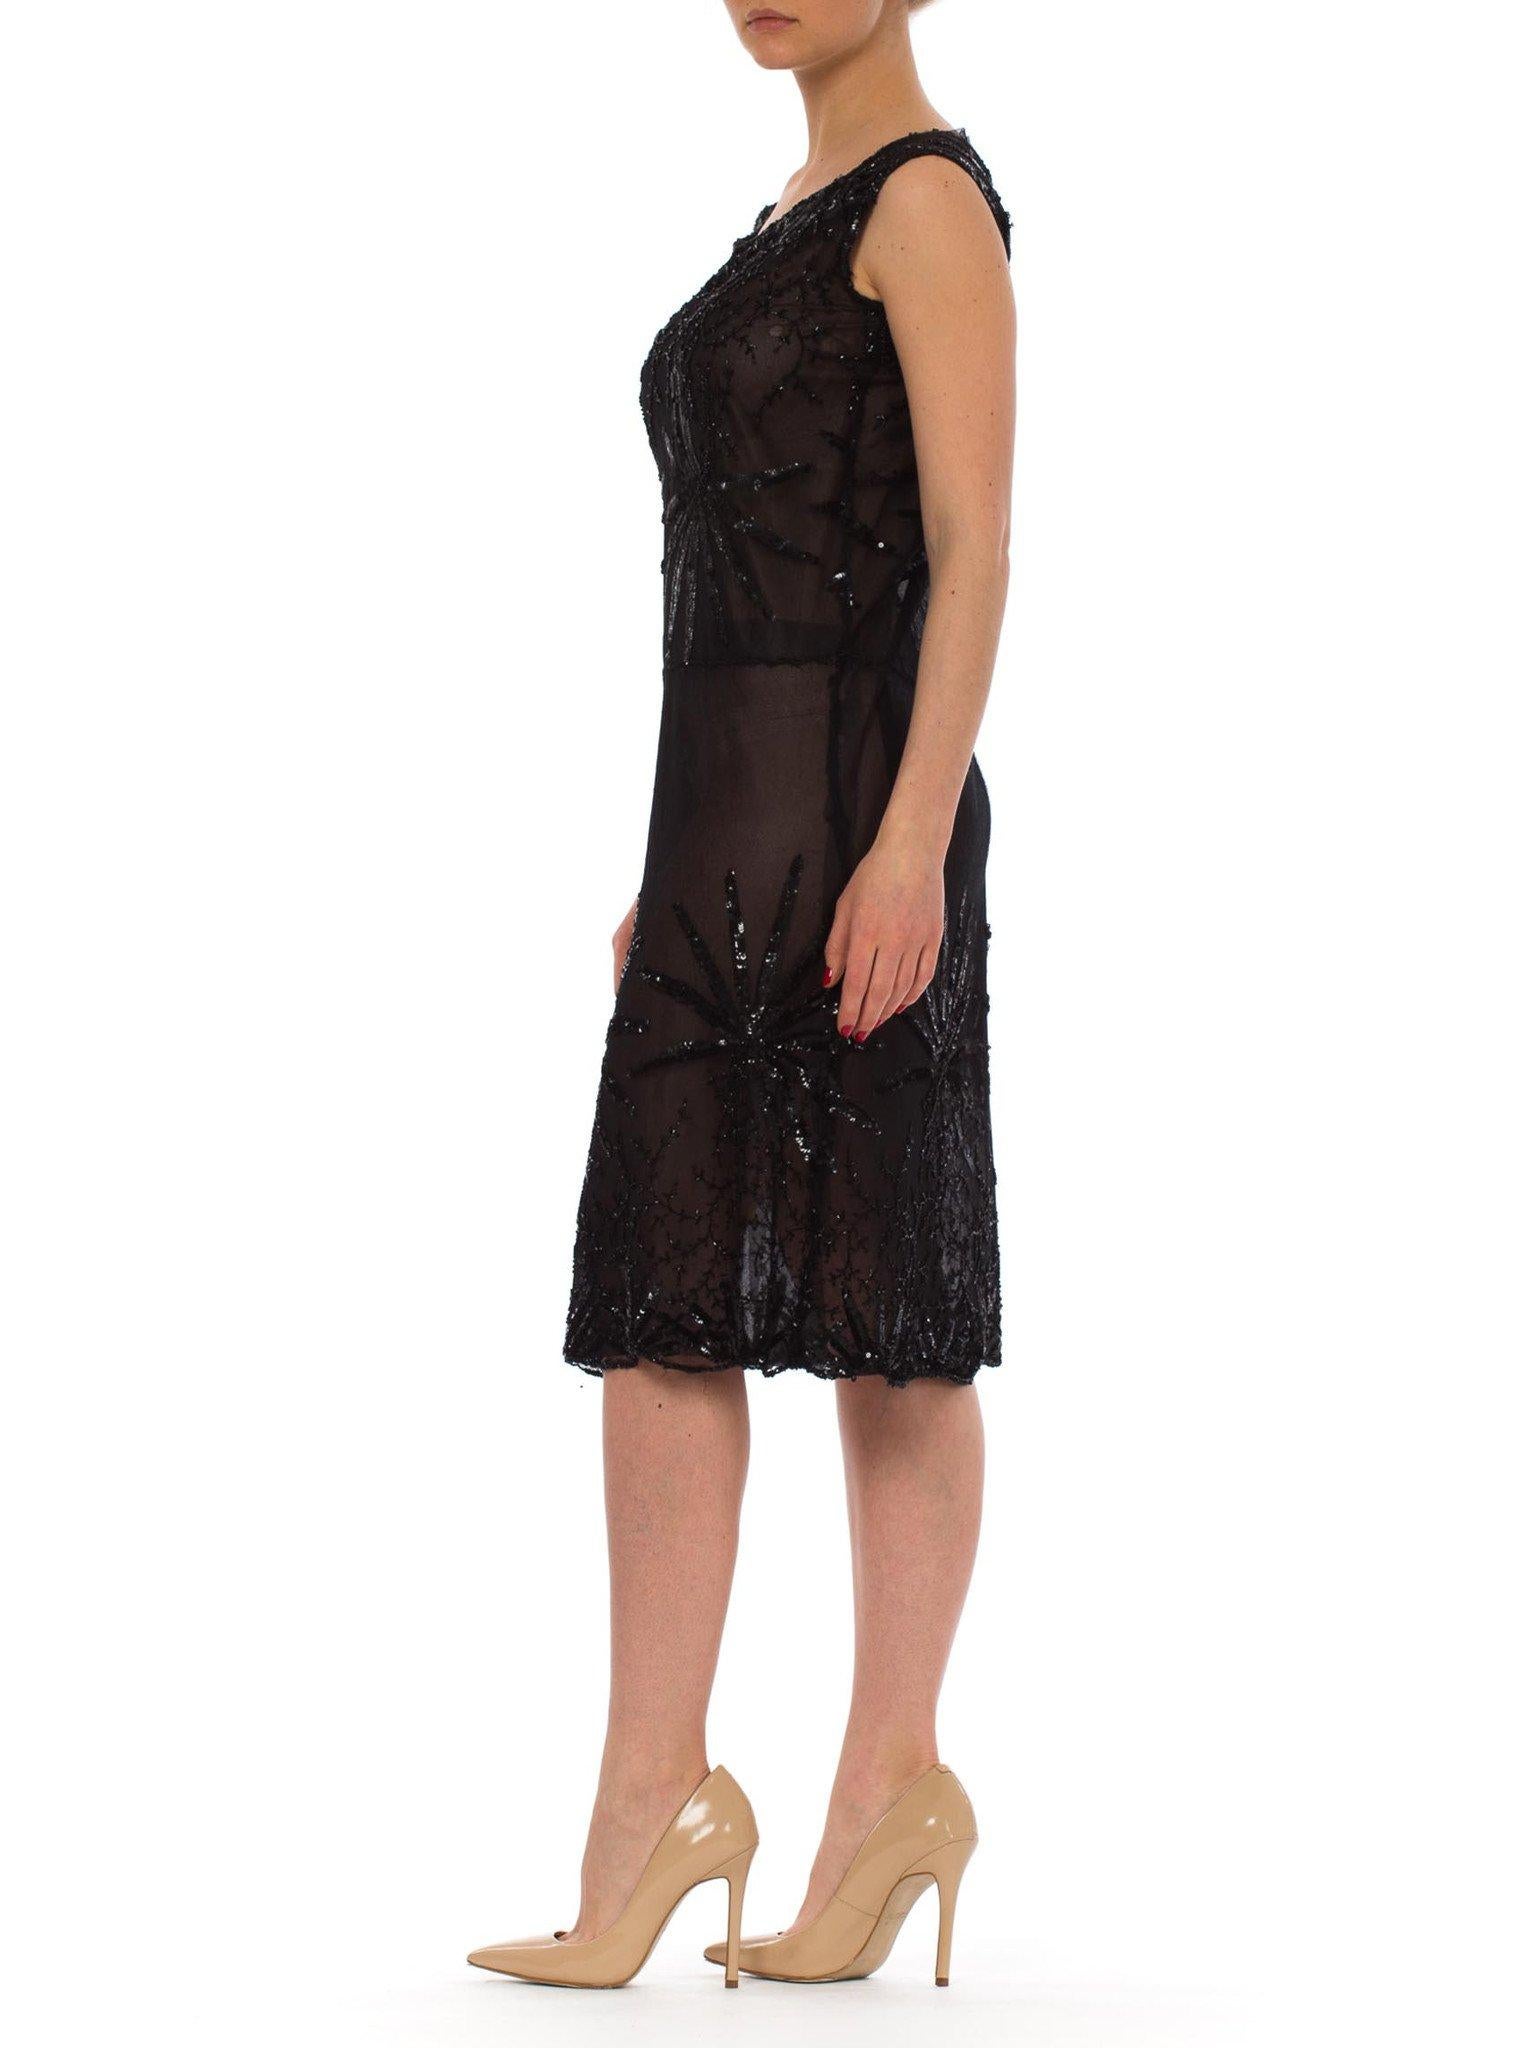 Women's 1920S Black Beaded Net Sheer Flapper Cocktail Dress With Large Sequined Flowers For Sale